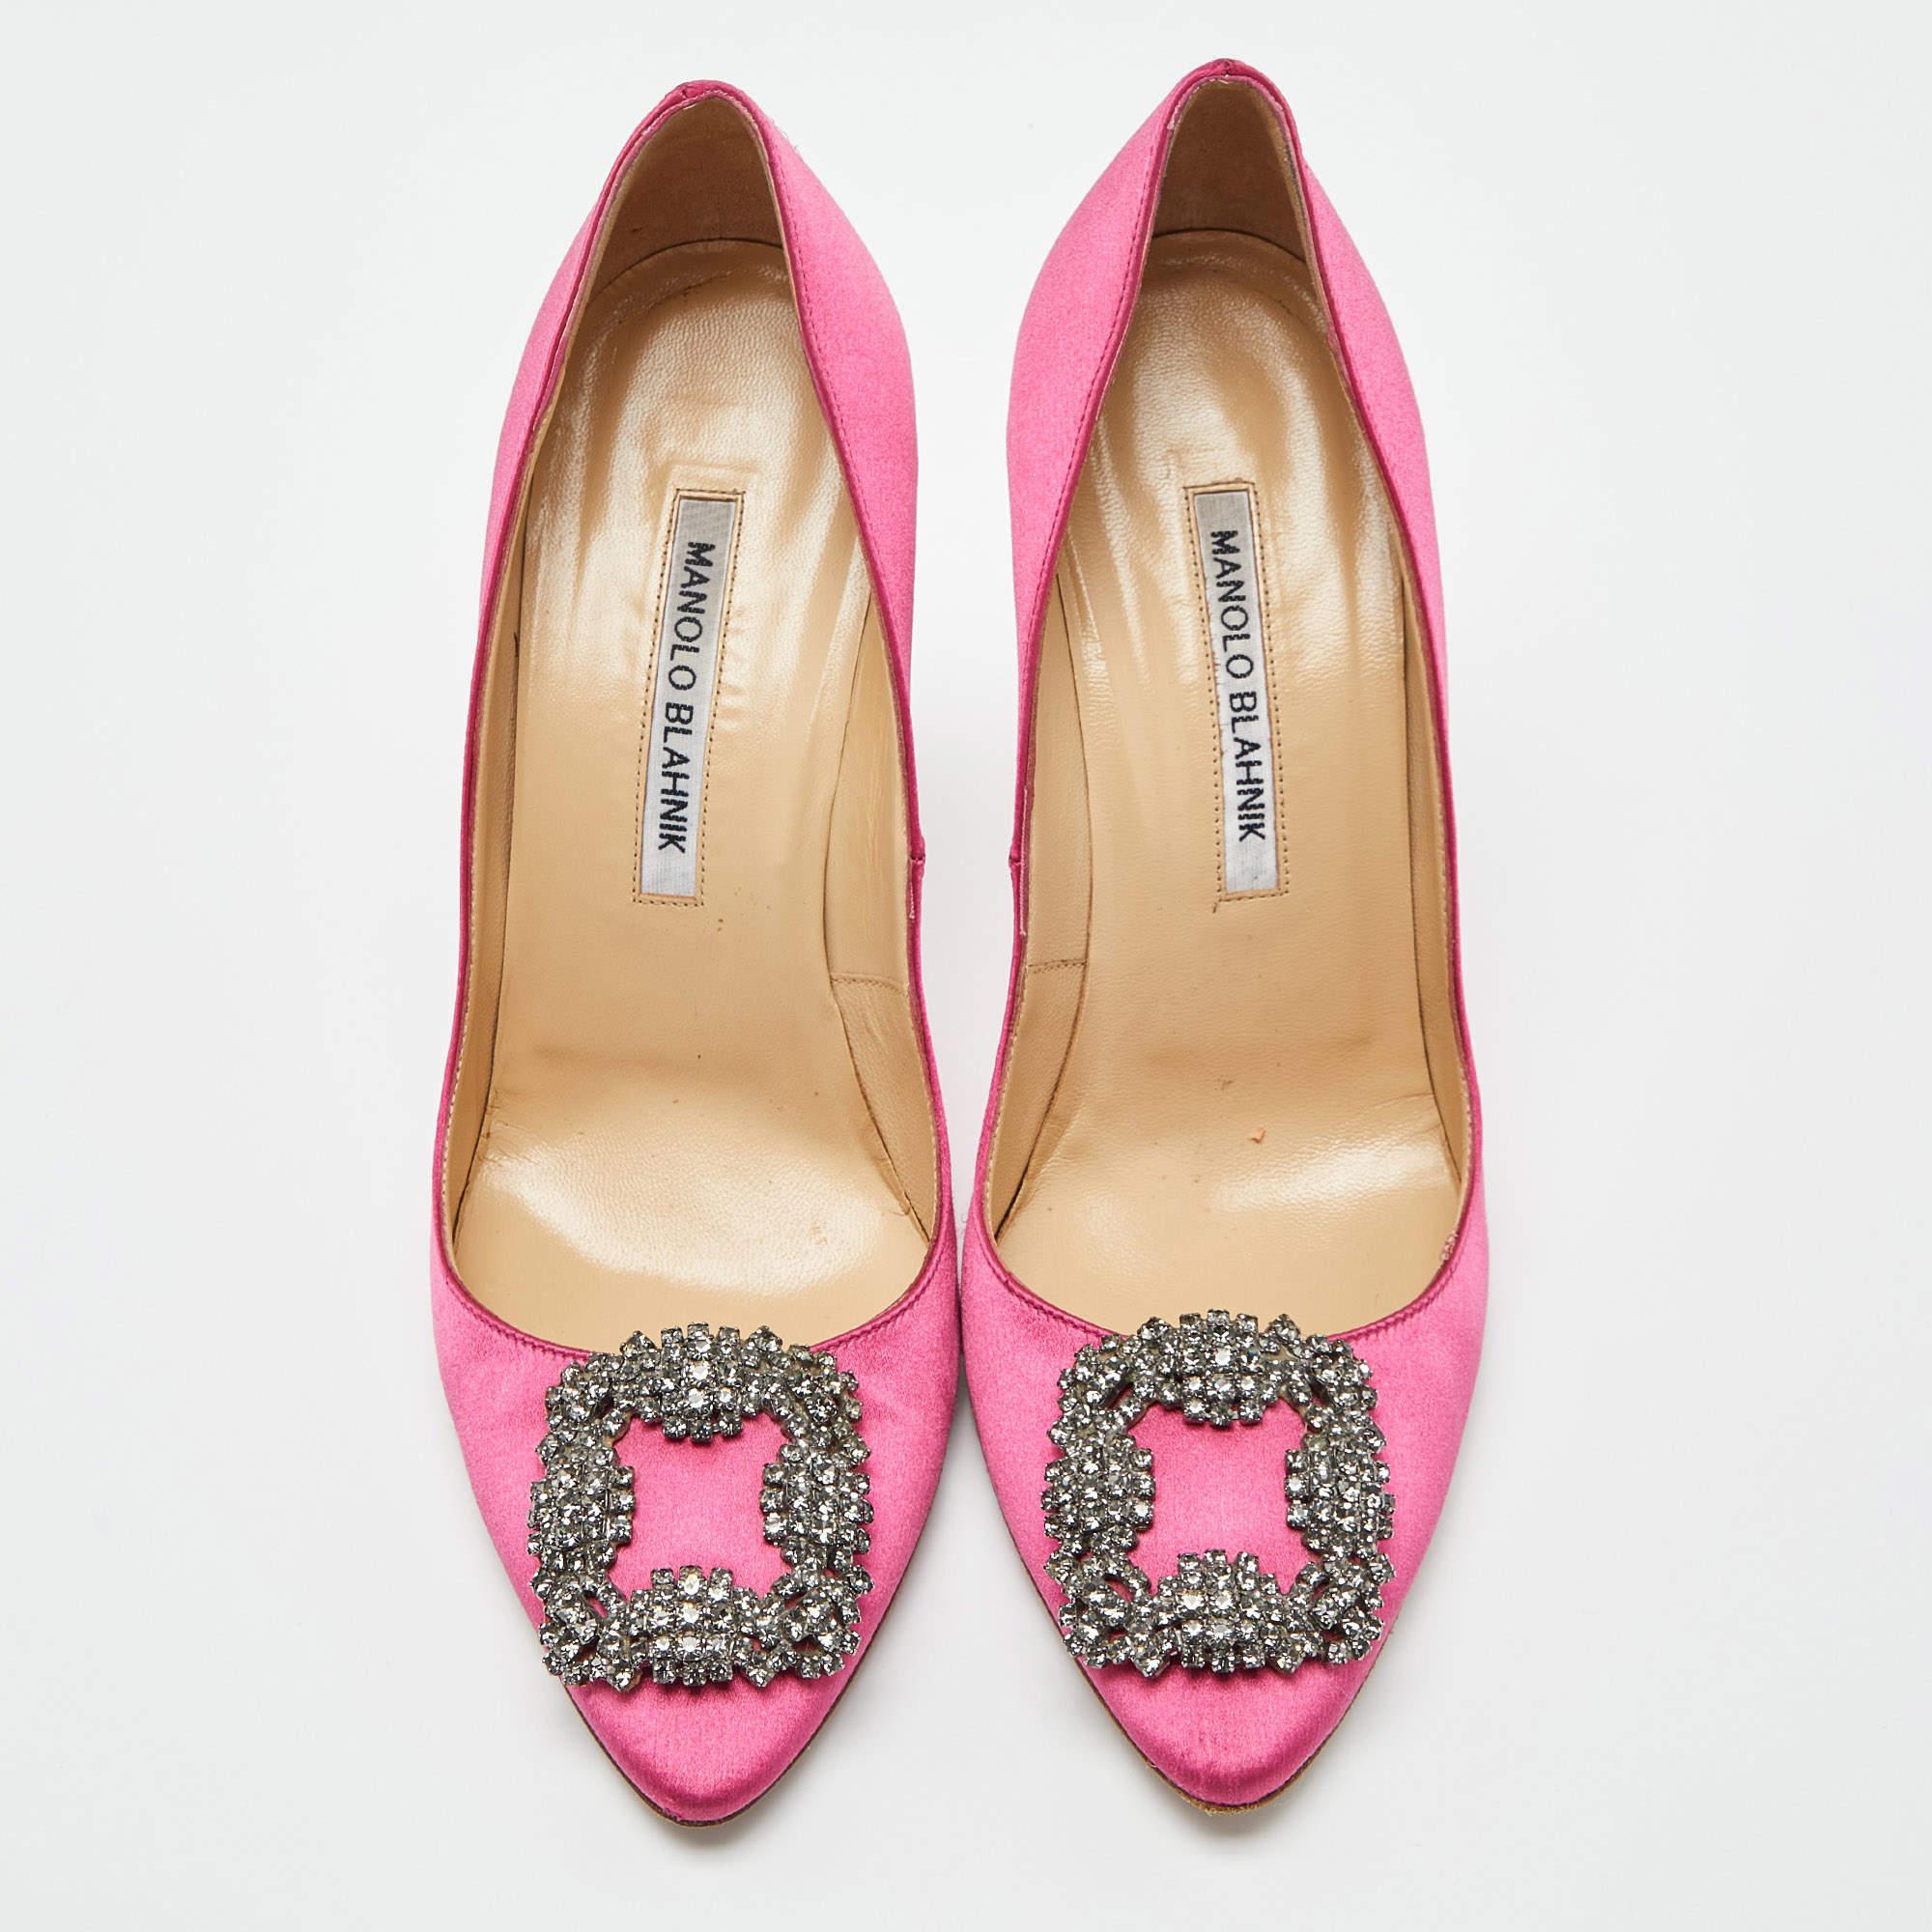 The 10.5cm heels of this pair of Manolo Blahnik pumps will reflect grace and luxury in every step. Made from satin, it is made striking with a crystal-embellished buckle detailing on the toes and exhibits branded insoles.

Includes
Original Dustbag